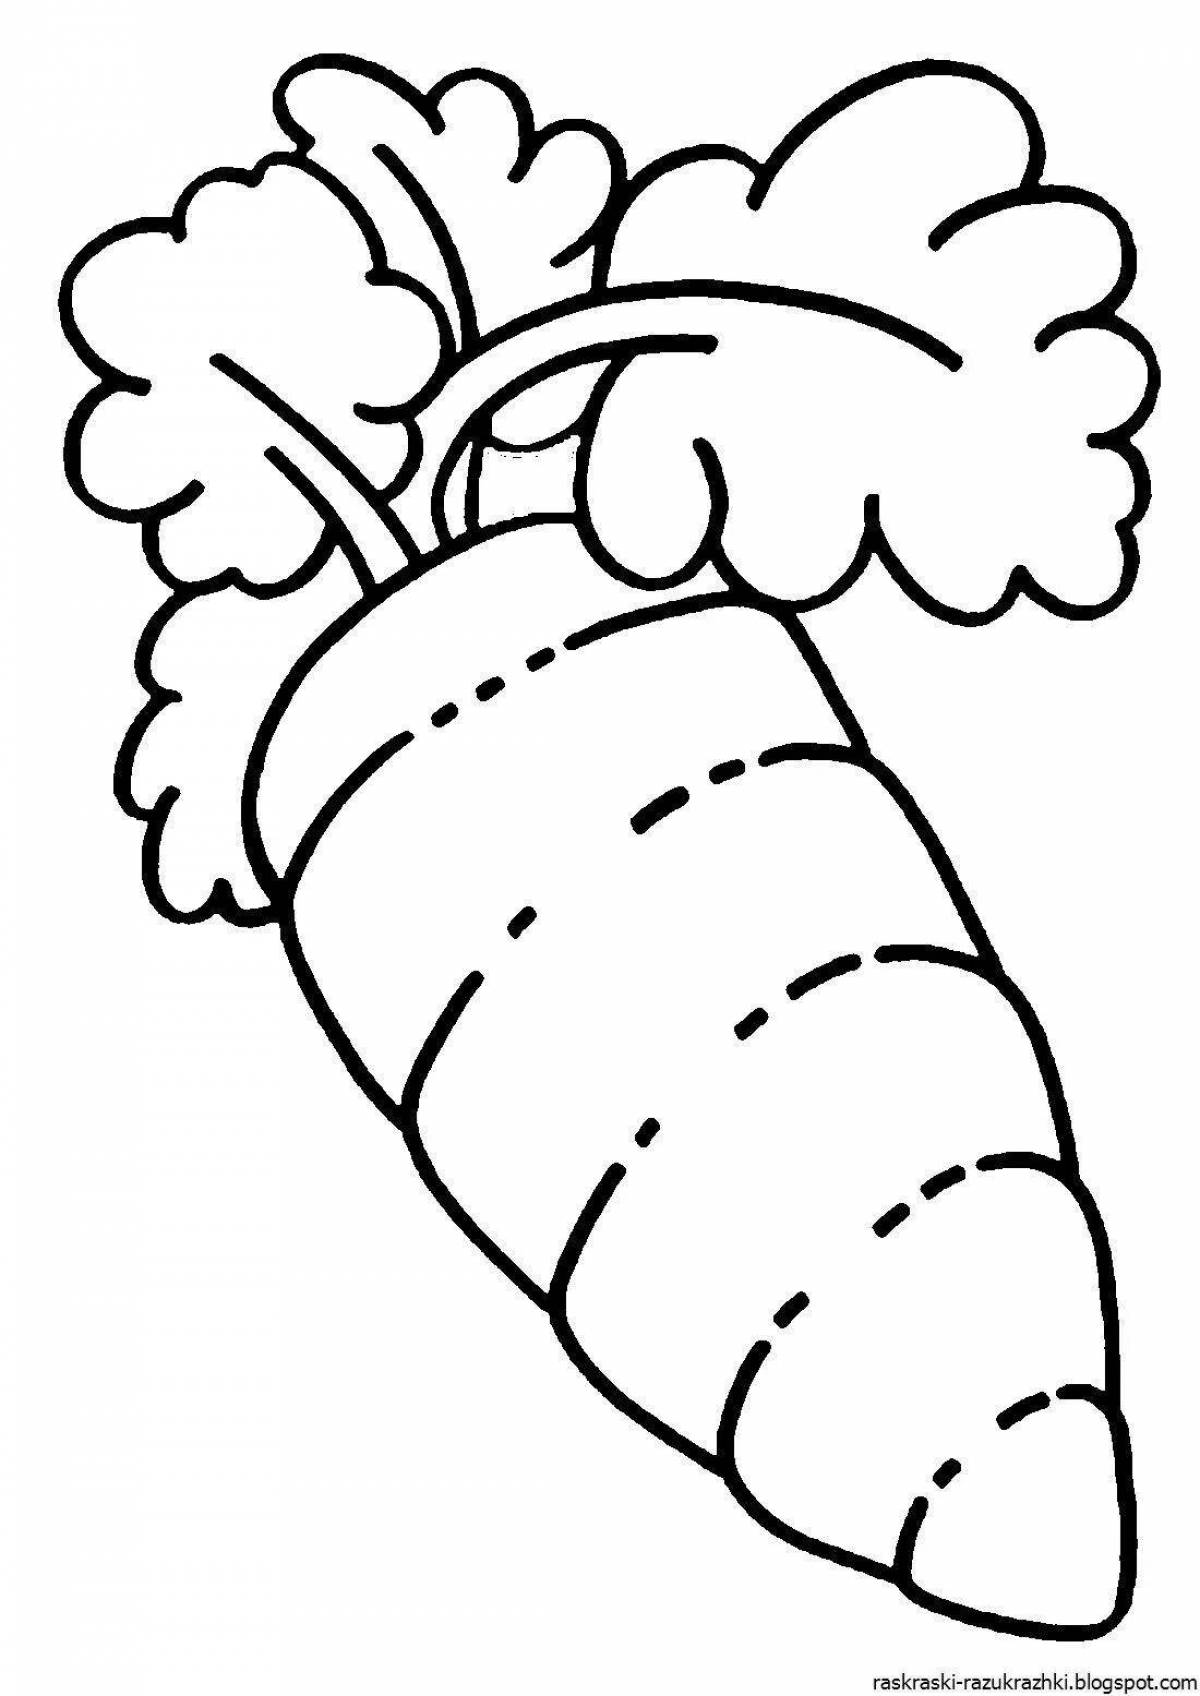 Glittering carrot pattern coloring page